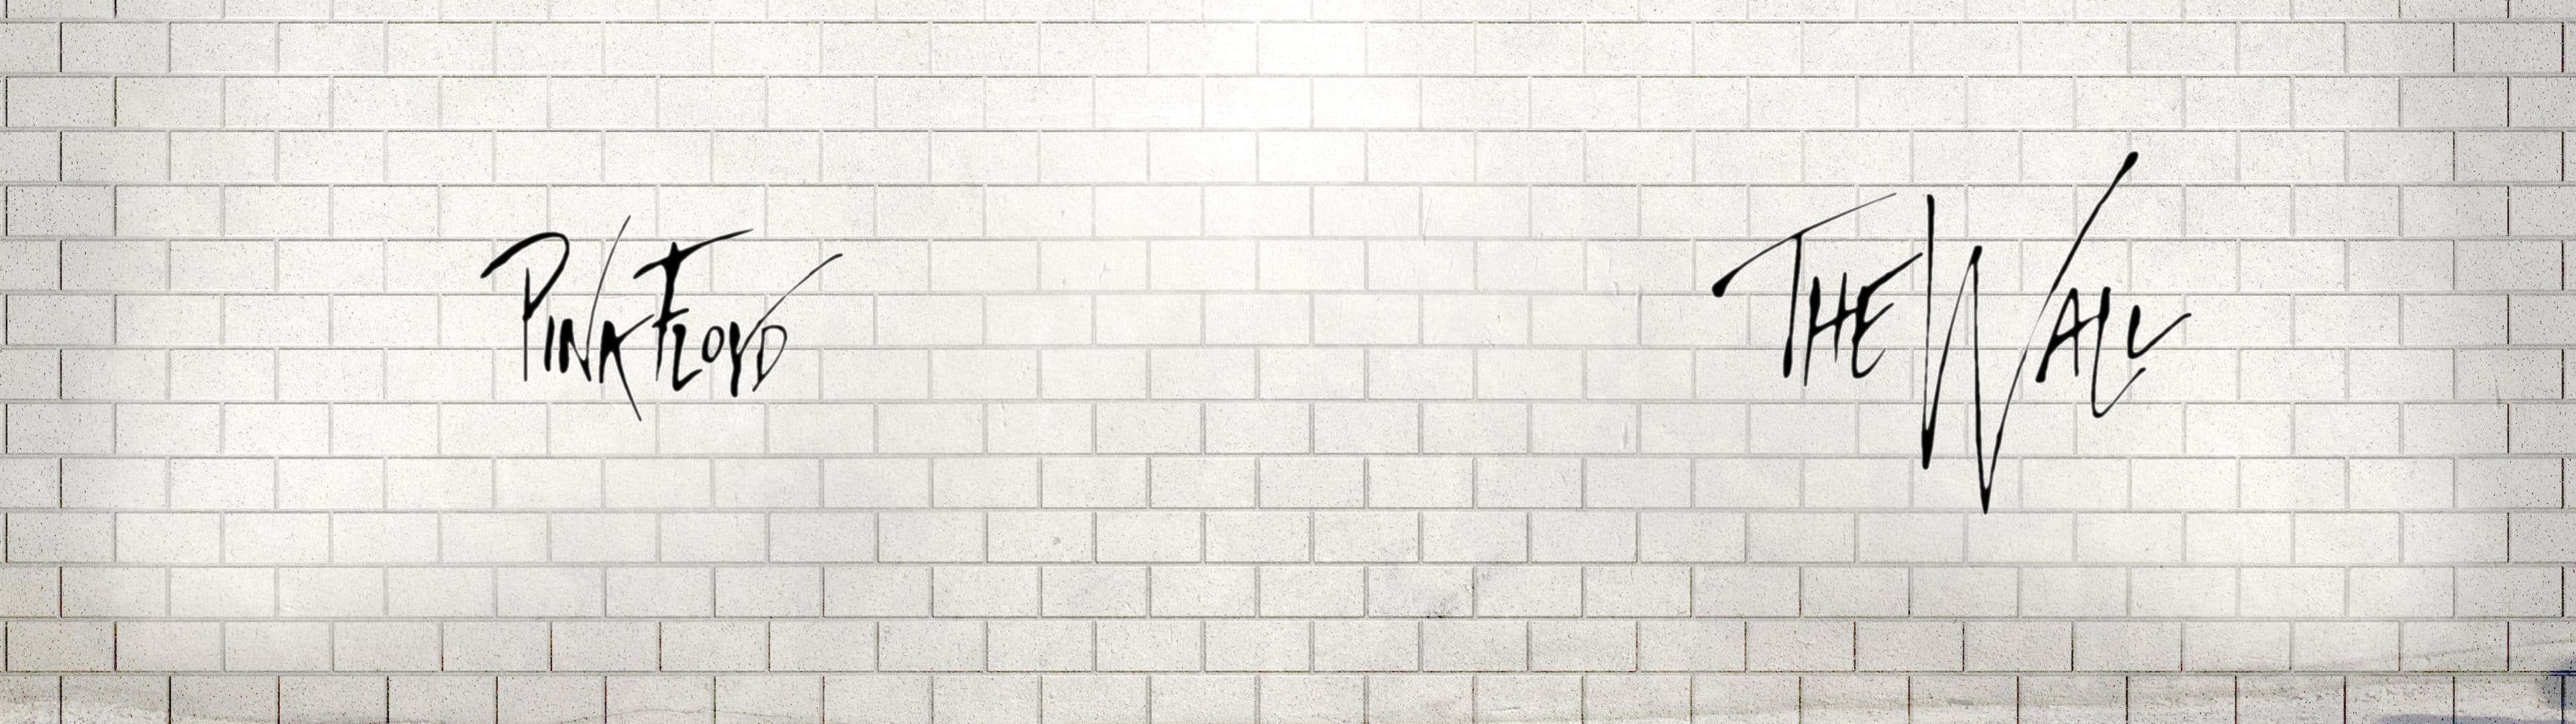 Music Iconic: Pink Floyd The Wall Wallpaper